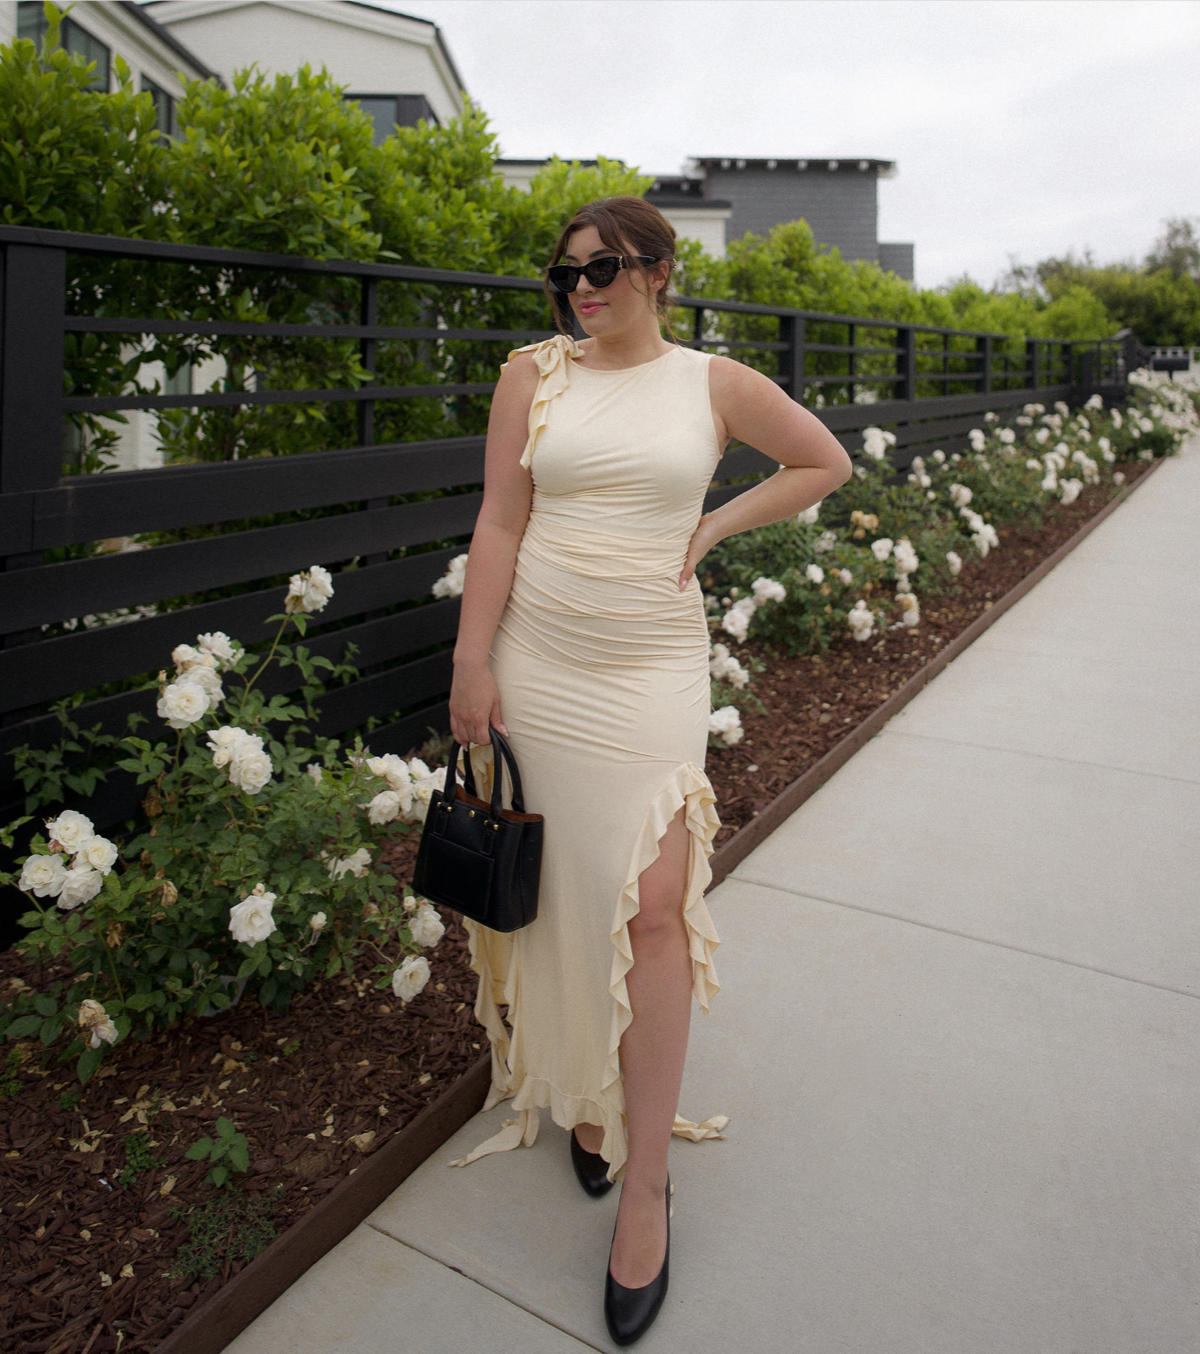 Influencer @katie_lavieri styles the LifeStride Parigi pump in black smooth with a ruffled sleeveless beige maxi dress and black accessories, standing next to white rose bushes.